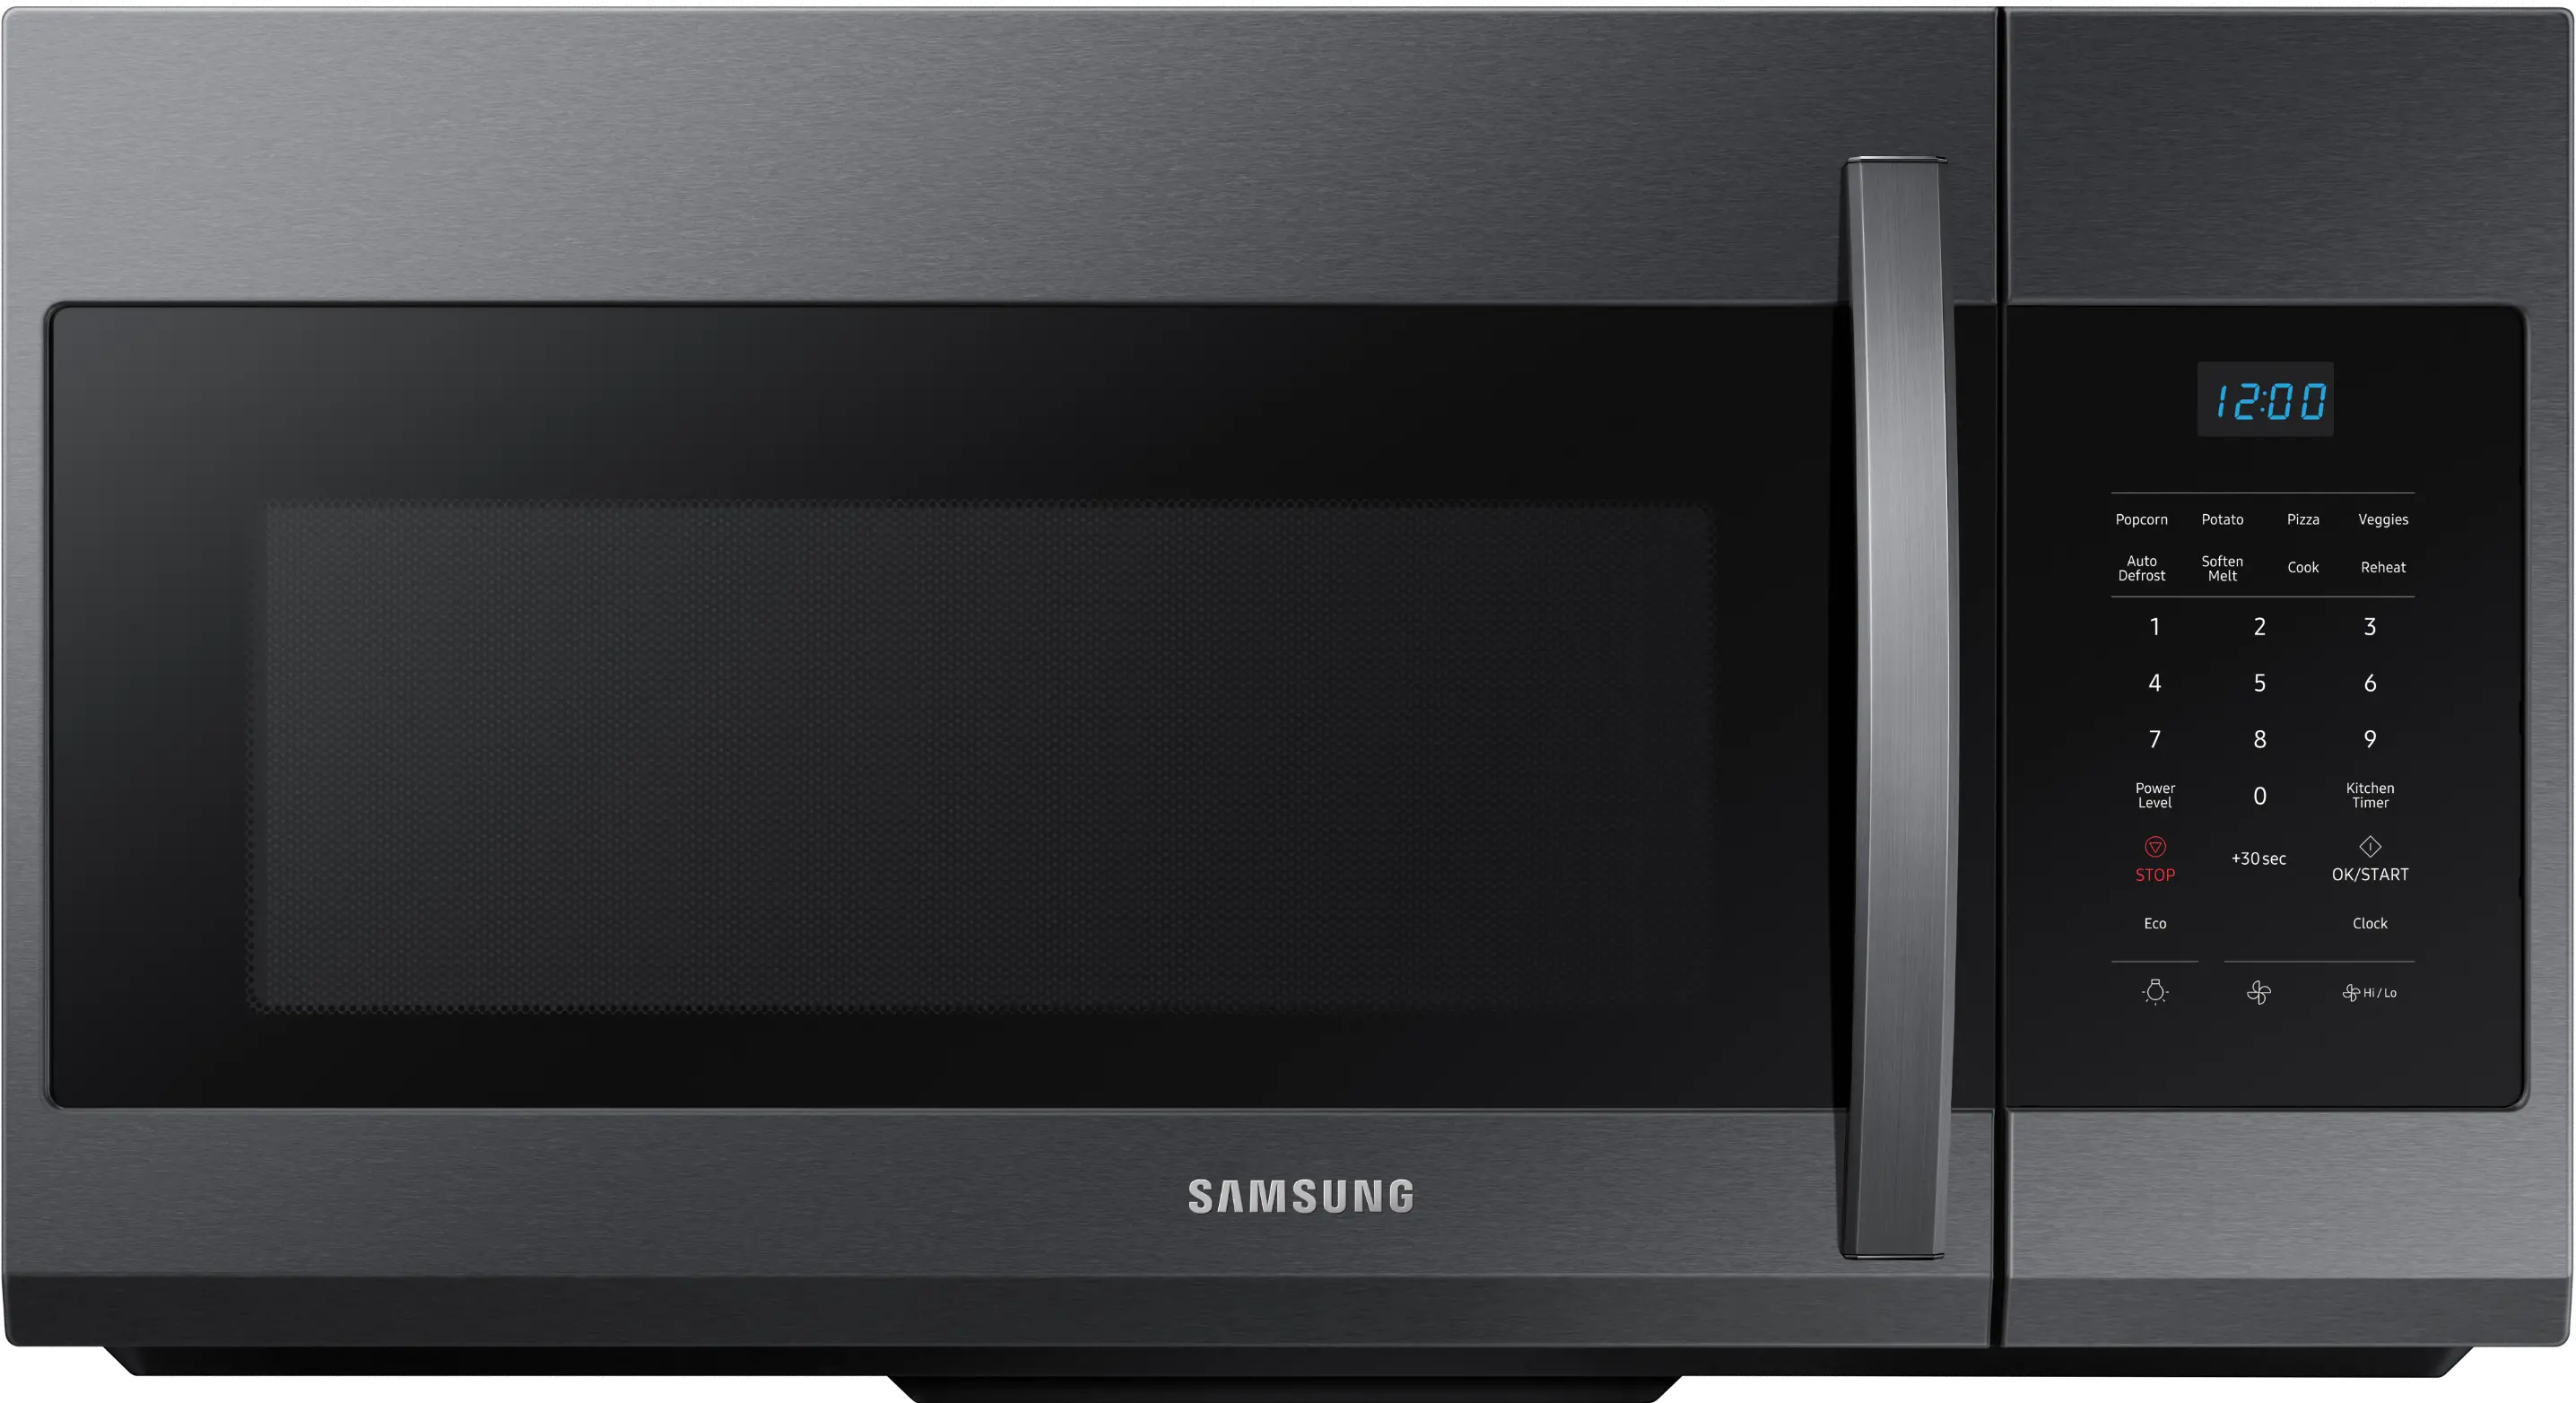 Samsung Over the Range Microwave - 1.7 cu. ft., Black Stainless Steel